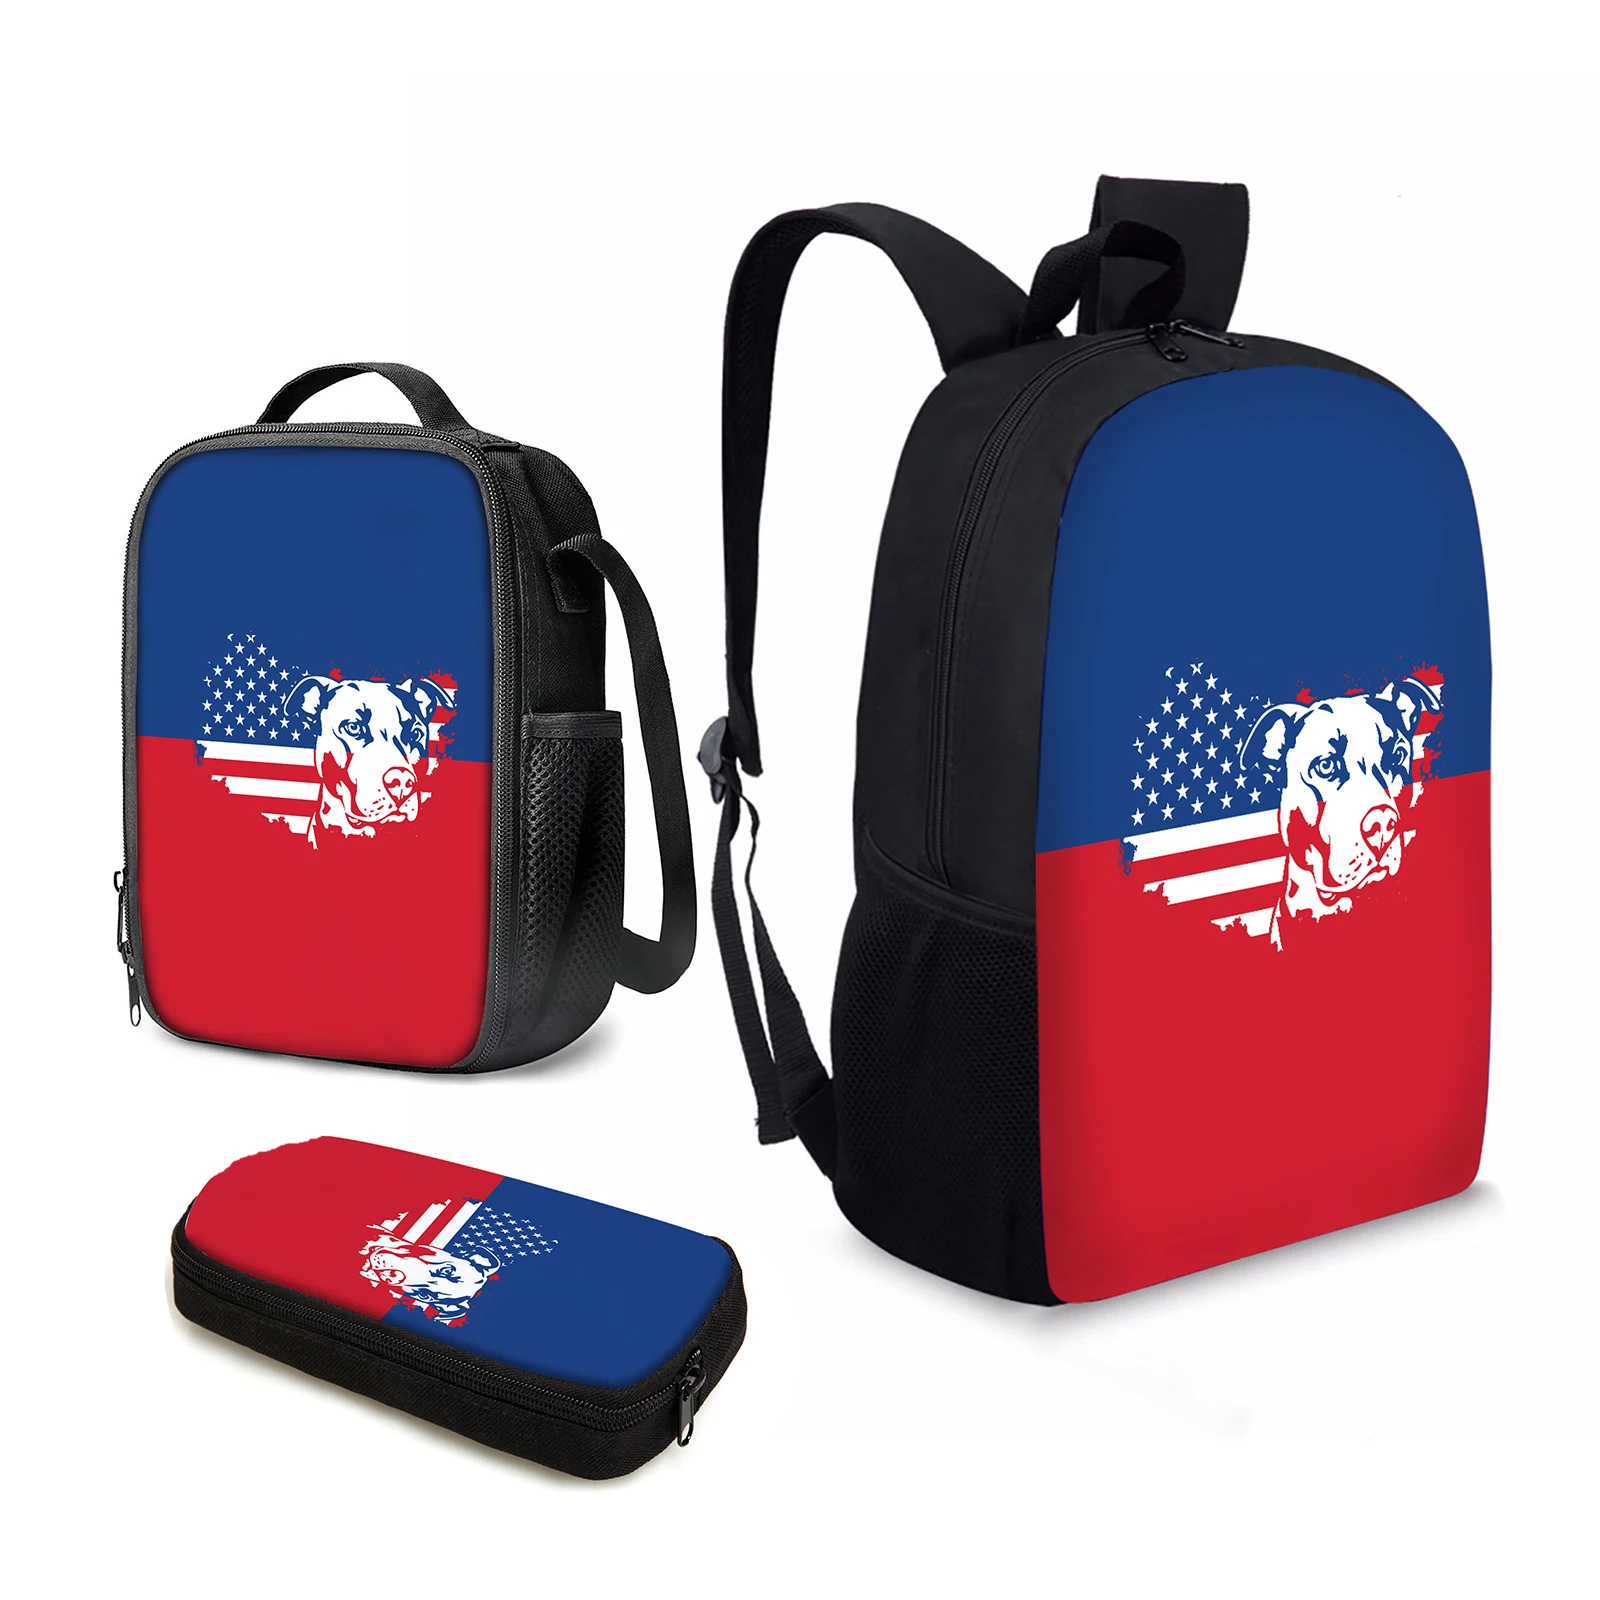 

YIKELUO 3PCS American Flag Designs Back To School Gifts Pitbull Print Waterproof Travel Bag Animal Print Insulated Lunch Bag